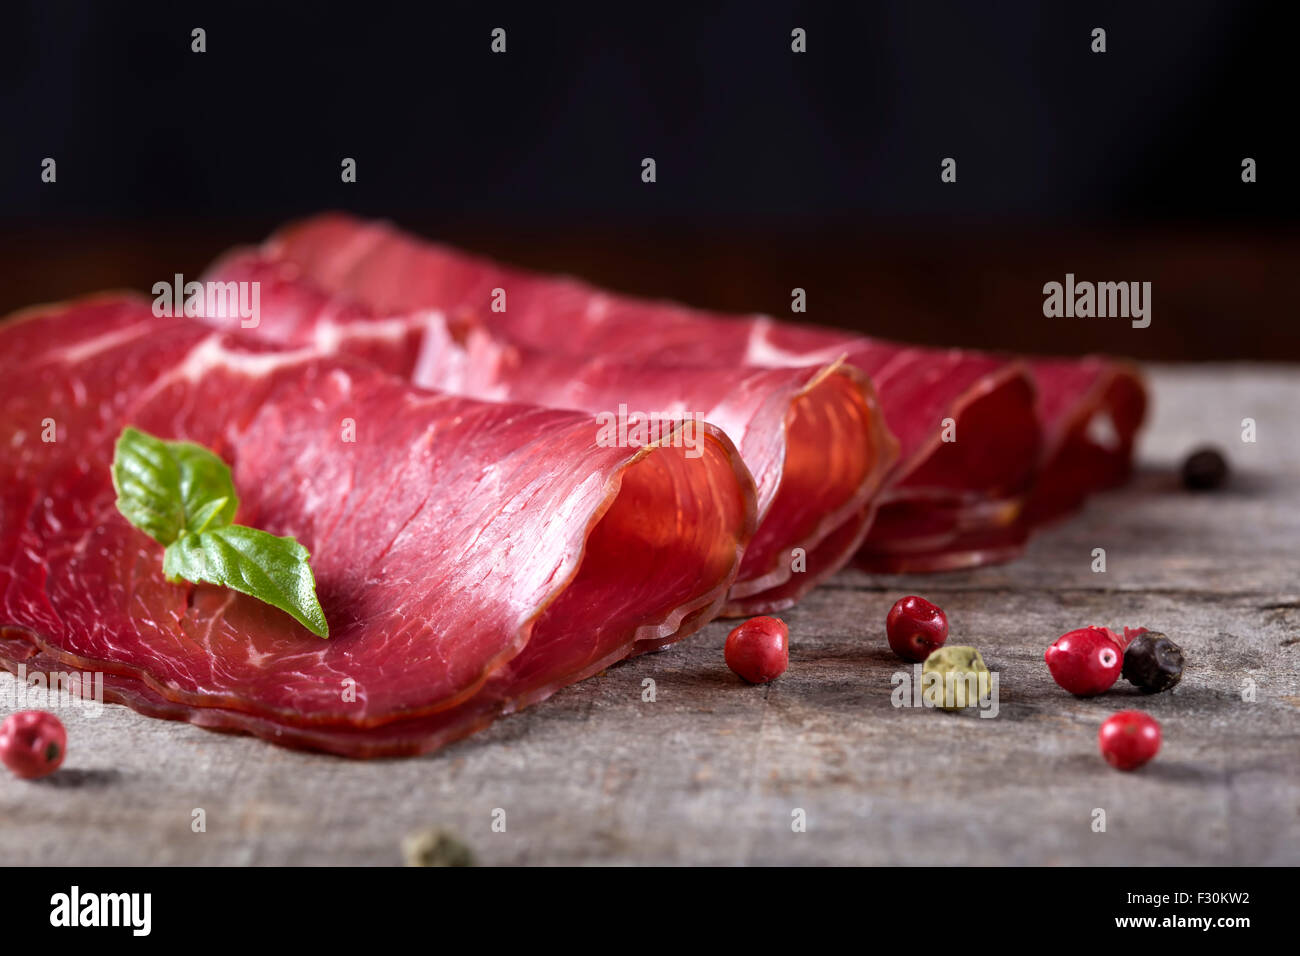 Smoked beef meat slices over rustic background Stock Photo